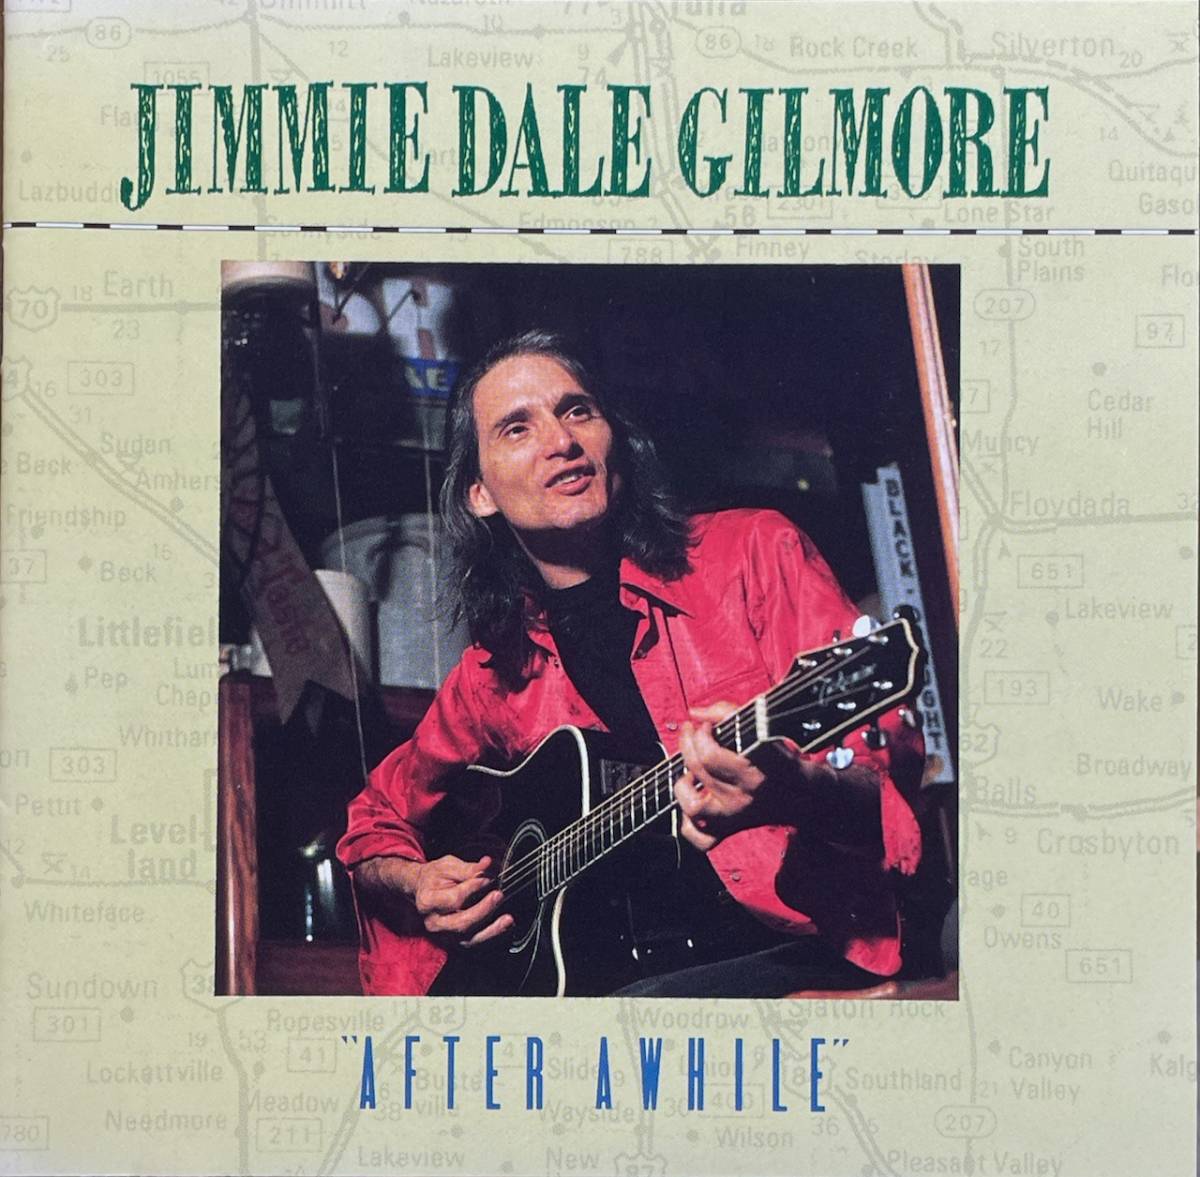 (C13H)☆カントリー廃盤/ジミー・デイル・ギルモア/Jimmie Dale Gilmore/アフター・アホワイル/"After Awhile"☆_画像1